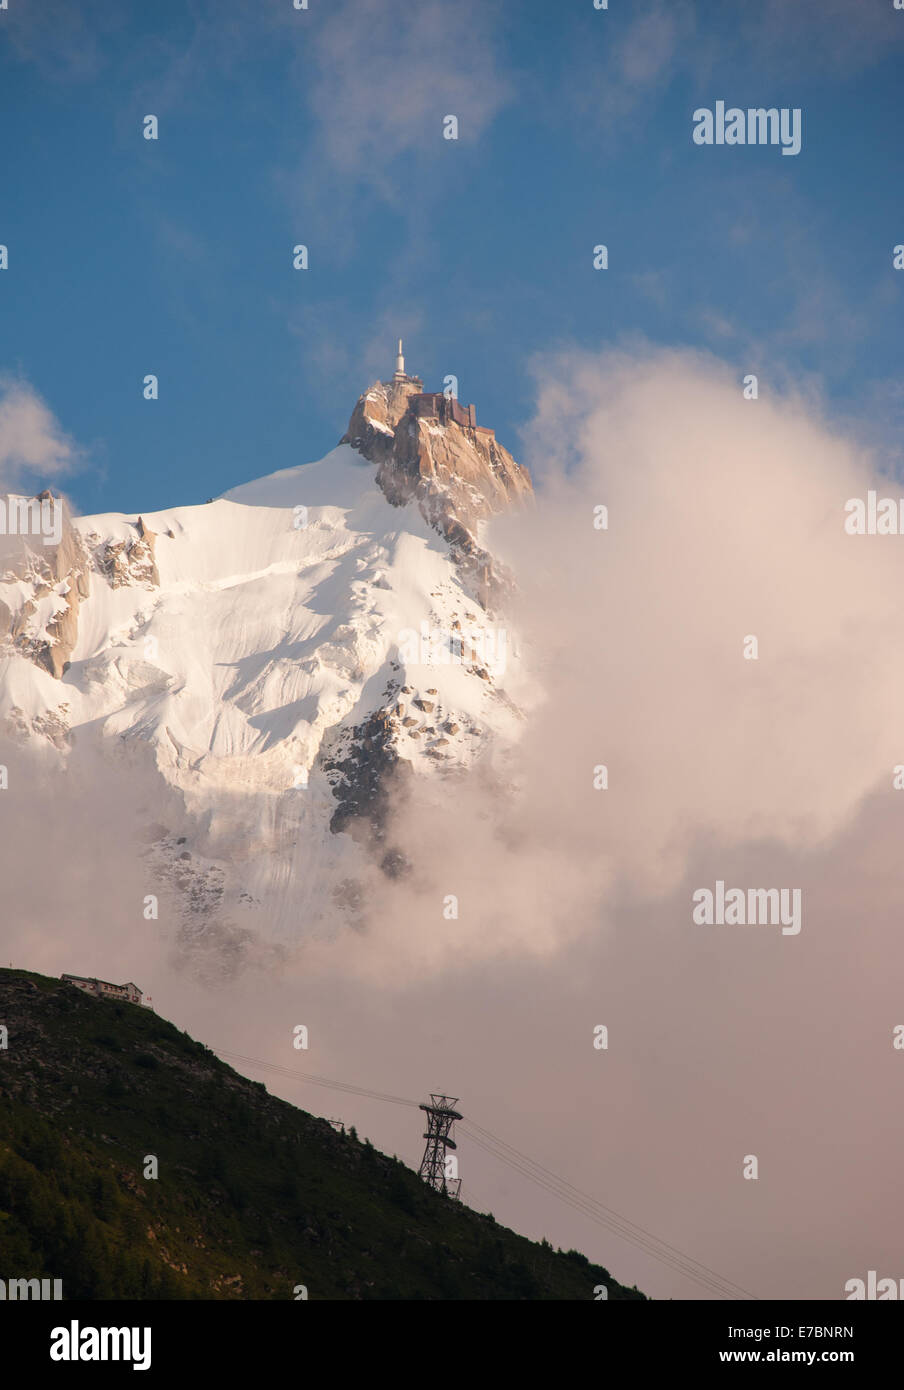 Aguille Du Midi appearing from cloud, French Alps, Chamonix, France Stock Photo